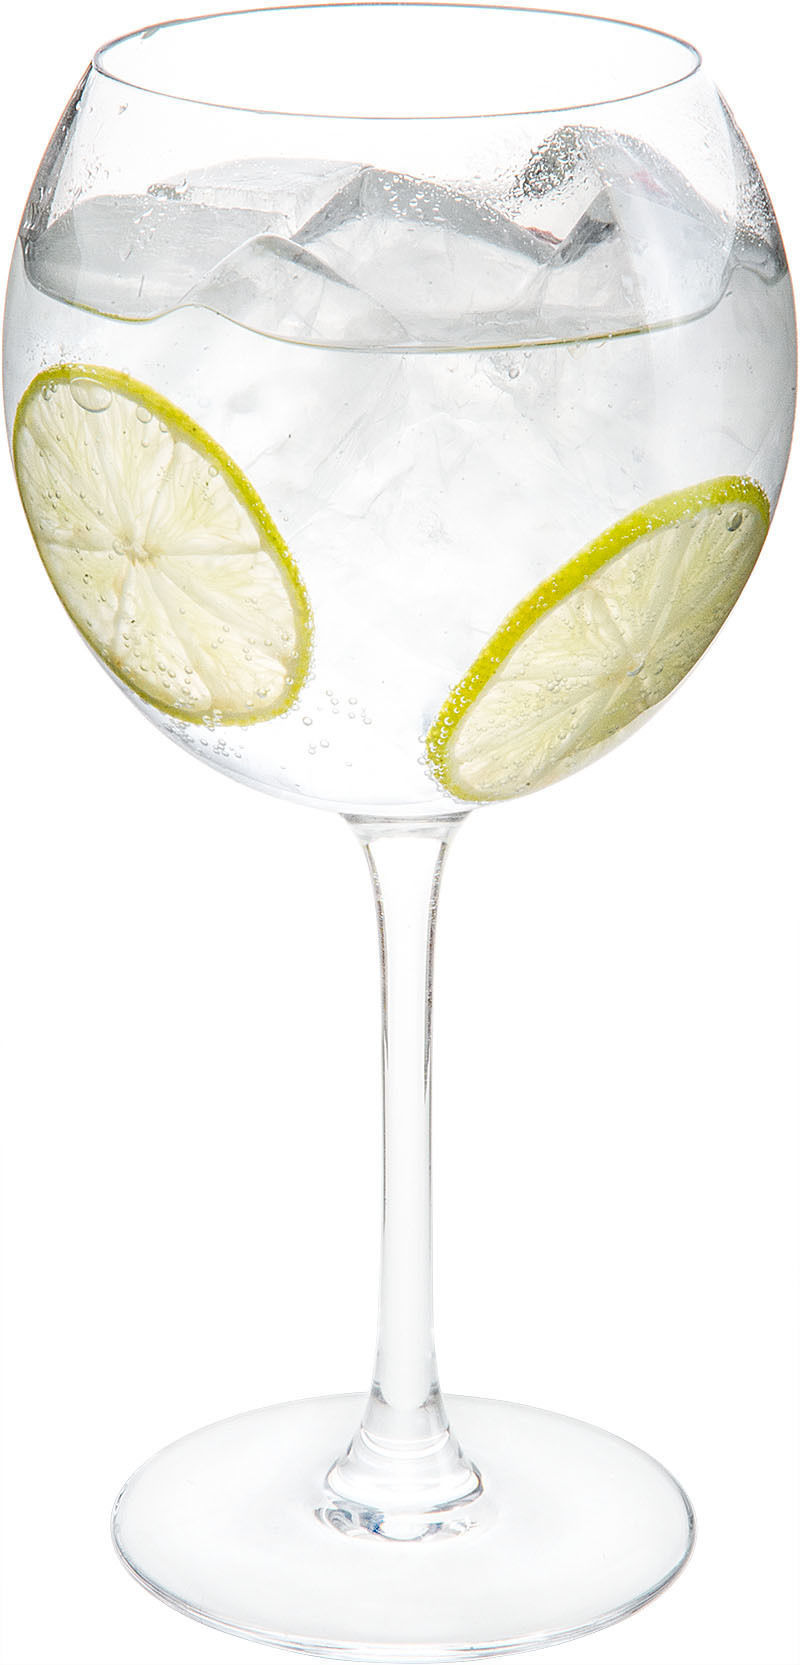 How to Make the Bianco and Tonic